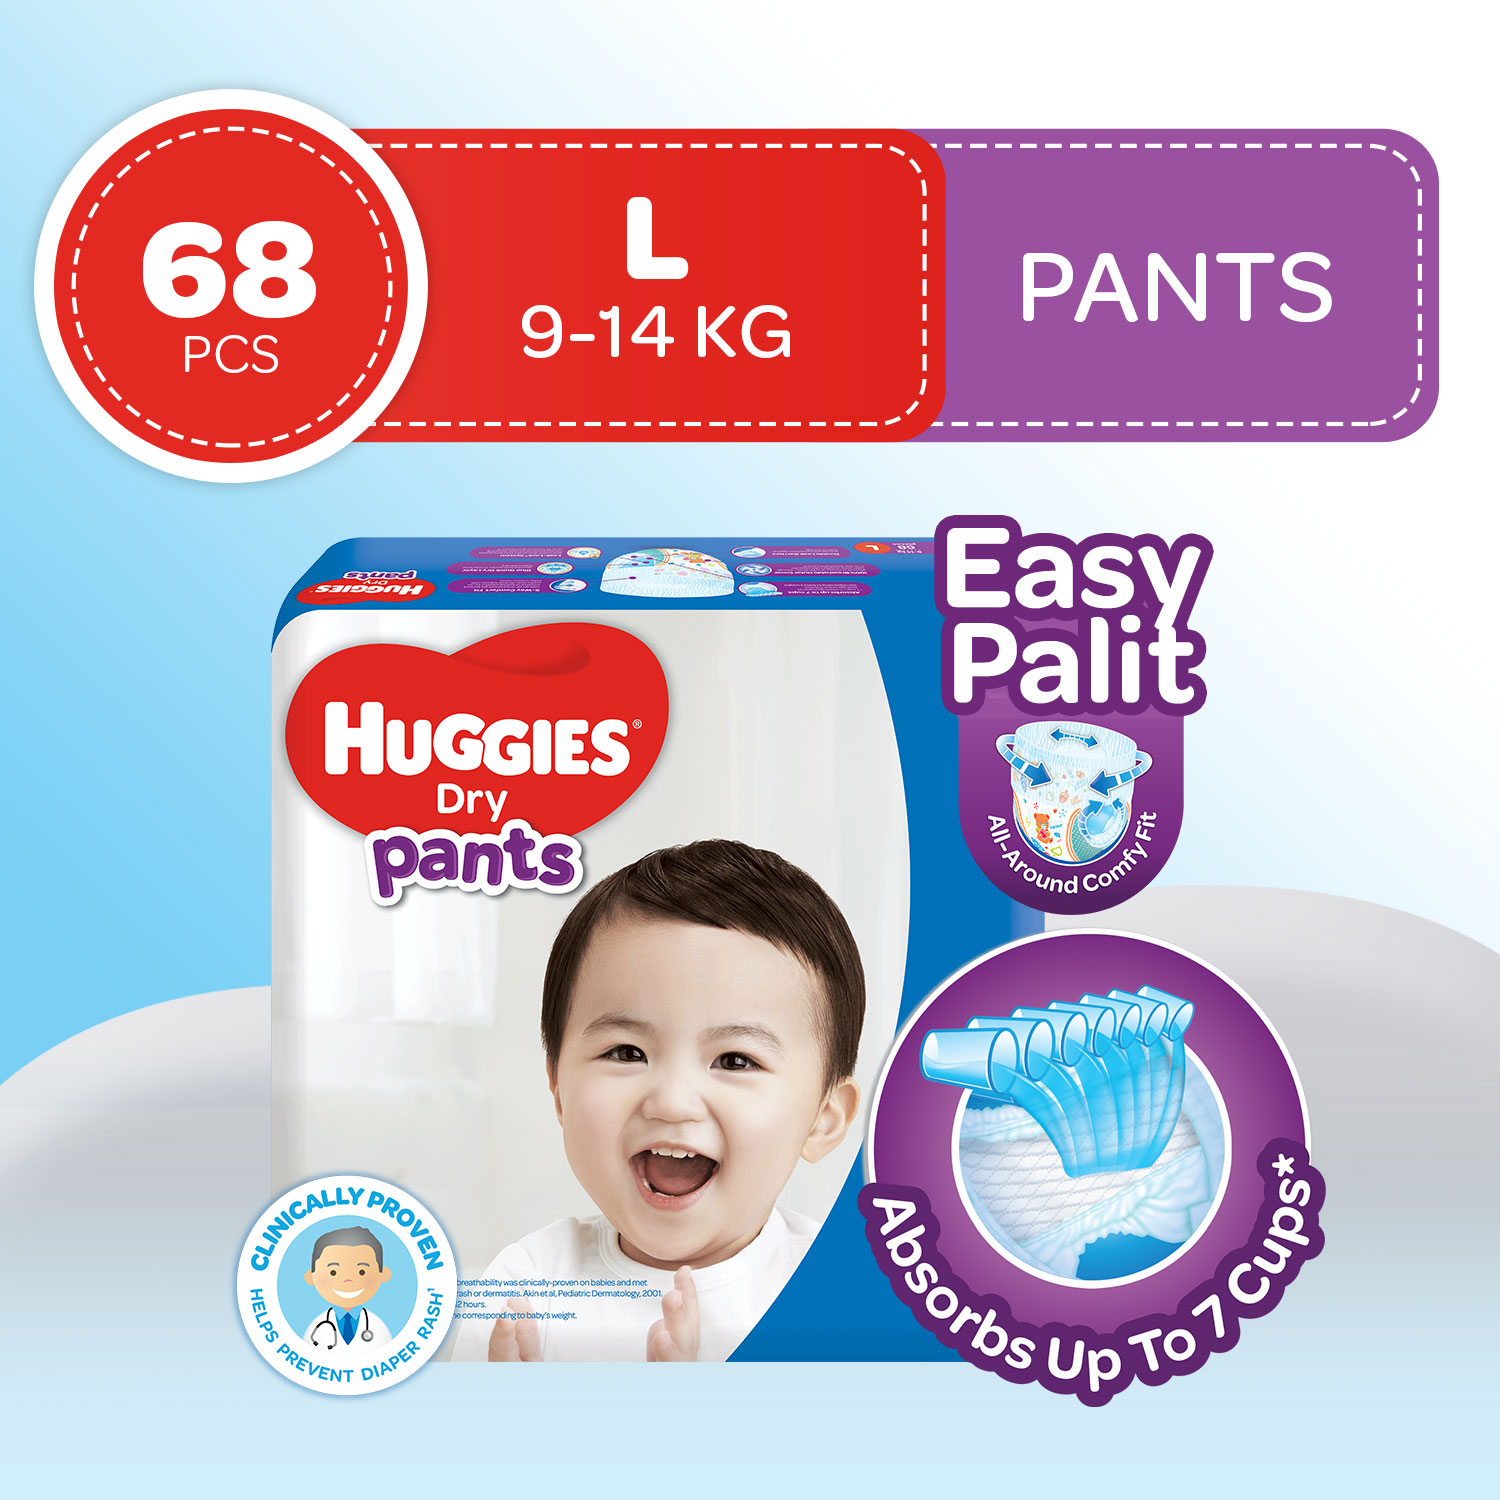 White Huggies Pants Large Size Baby Diaper at Best Price in New Delhi |  Baby Care Diapers